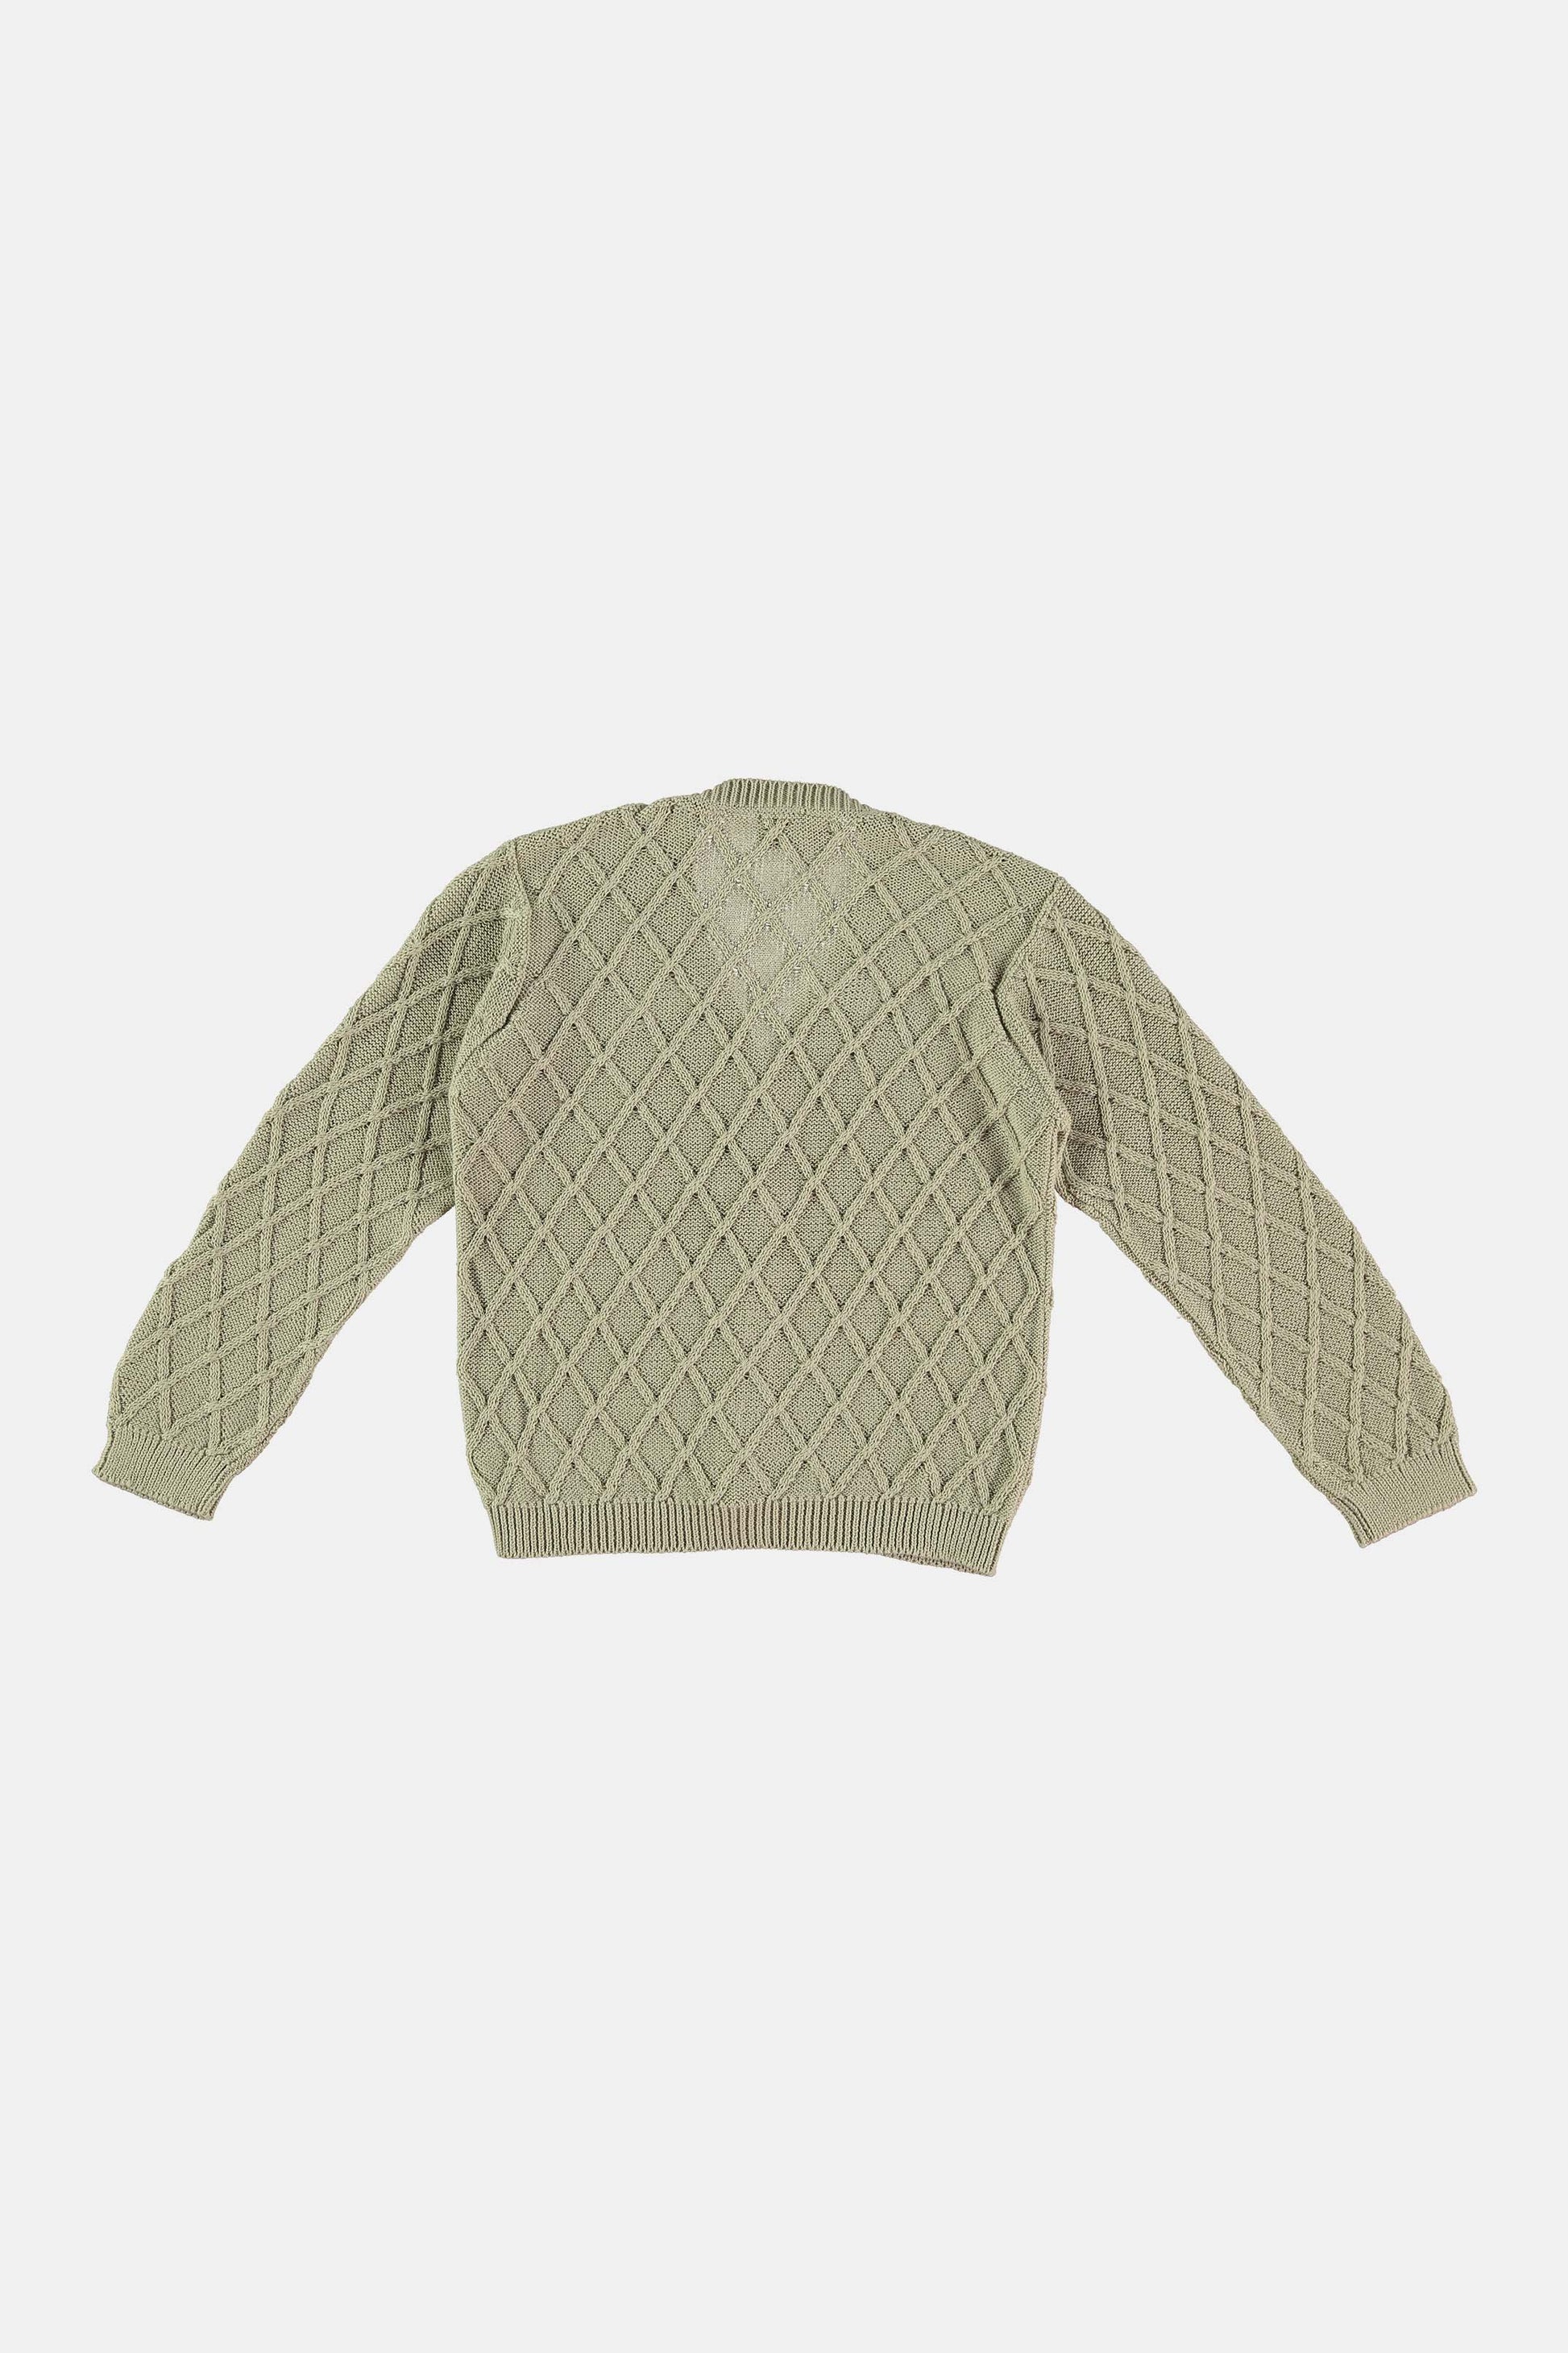 Coco Au Lait GREEN AVEN KNITTED CARDIGAN Jacket Alfalfa